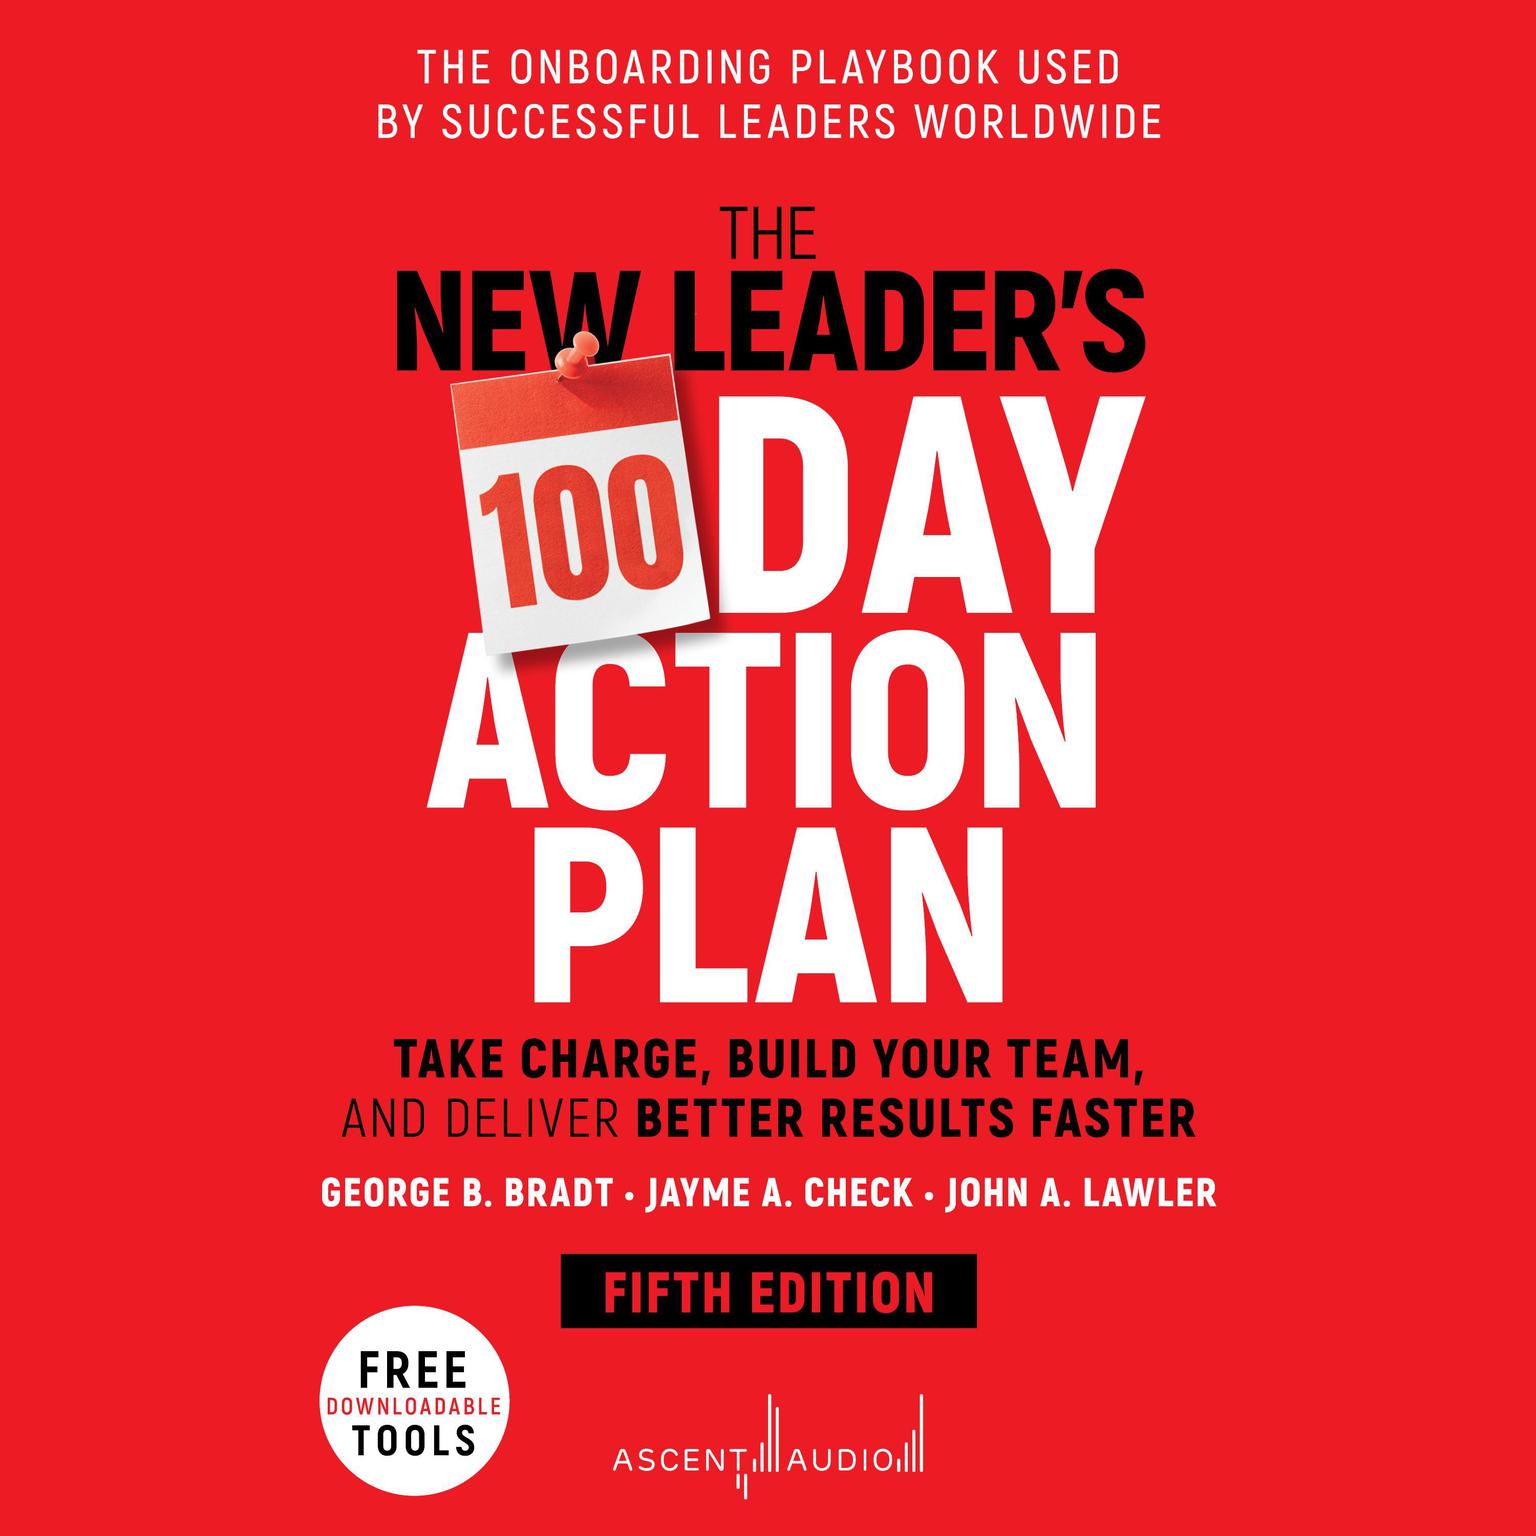 The New Leaders 100-Day Action Plan: Take Charge, Build Your Team, and Deliver Better Results Faster, 5th Edition Audiobook, by George B. Bradt